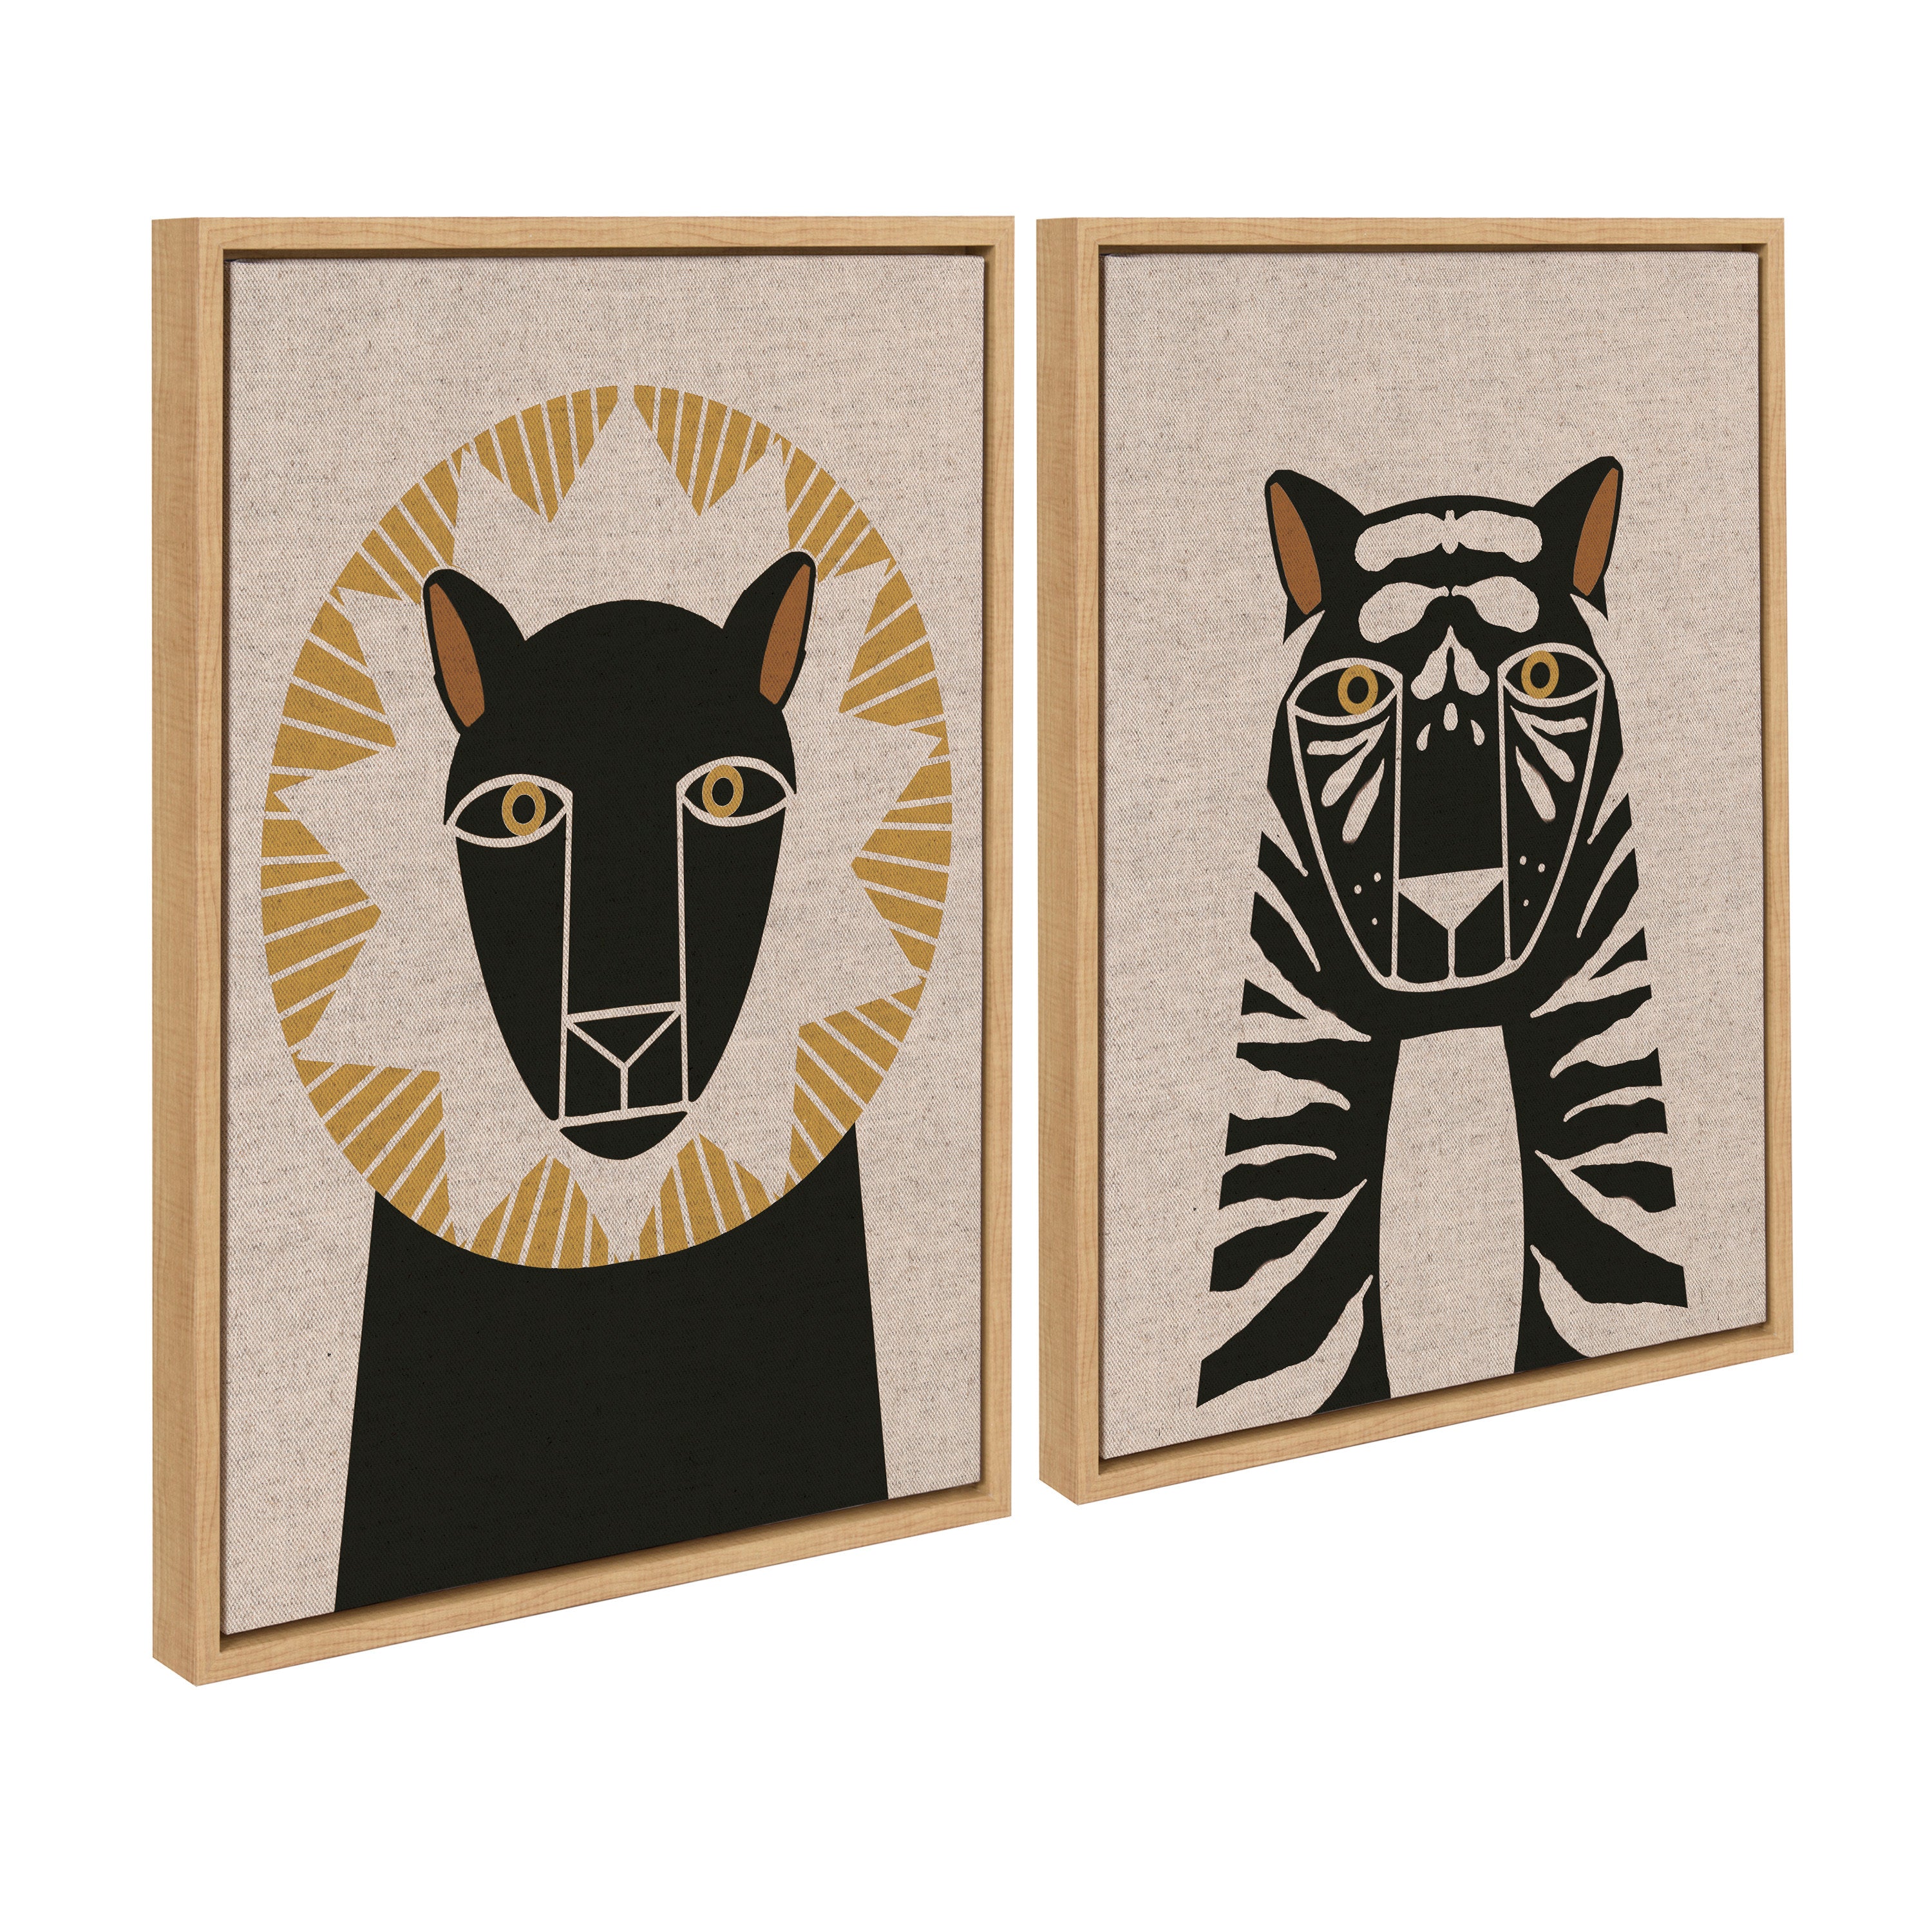 Sylvie Lion Profile Neutral Linen and Tiger Profile Neutral Linen Framed Canvas Art Set by Hannah Beisang